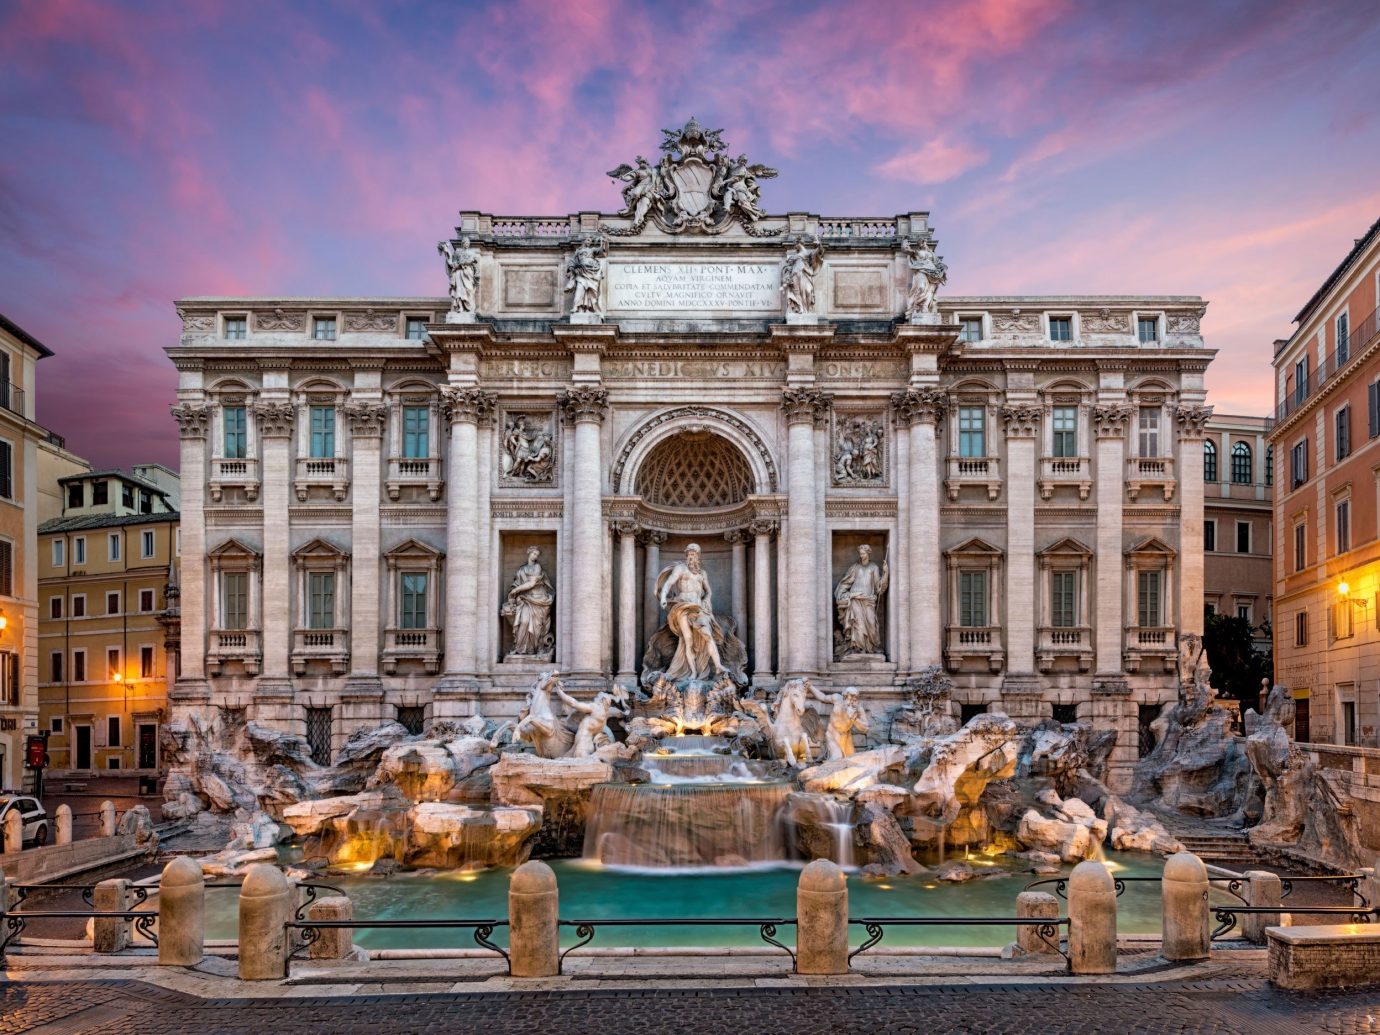 Trip Ideas building outdoor landmark plaza City human settlement metropolis Architecture ancient rome town square fountain cityscape palace facade water feature Downtown ancient history tourist attraction